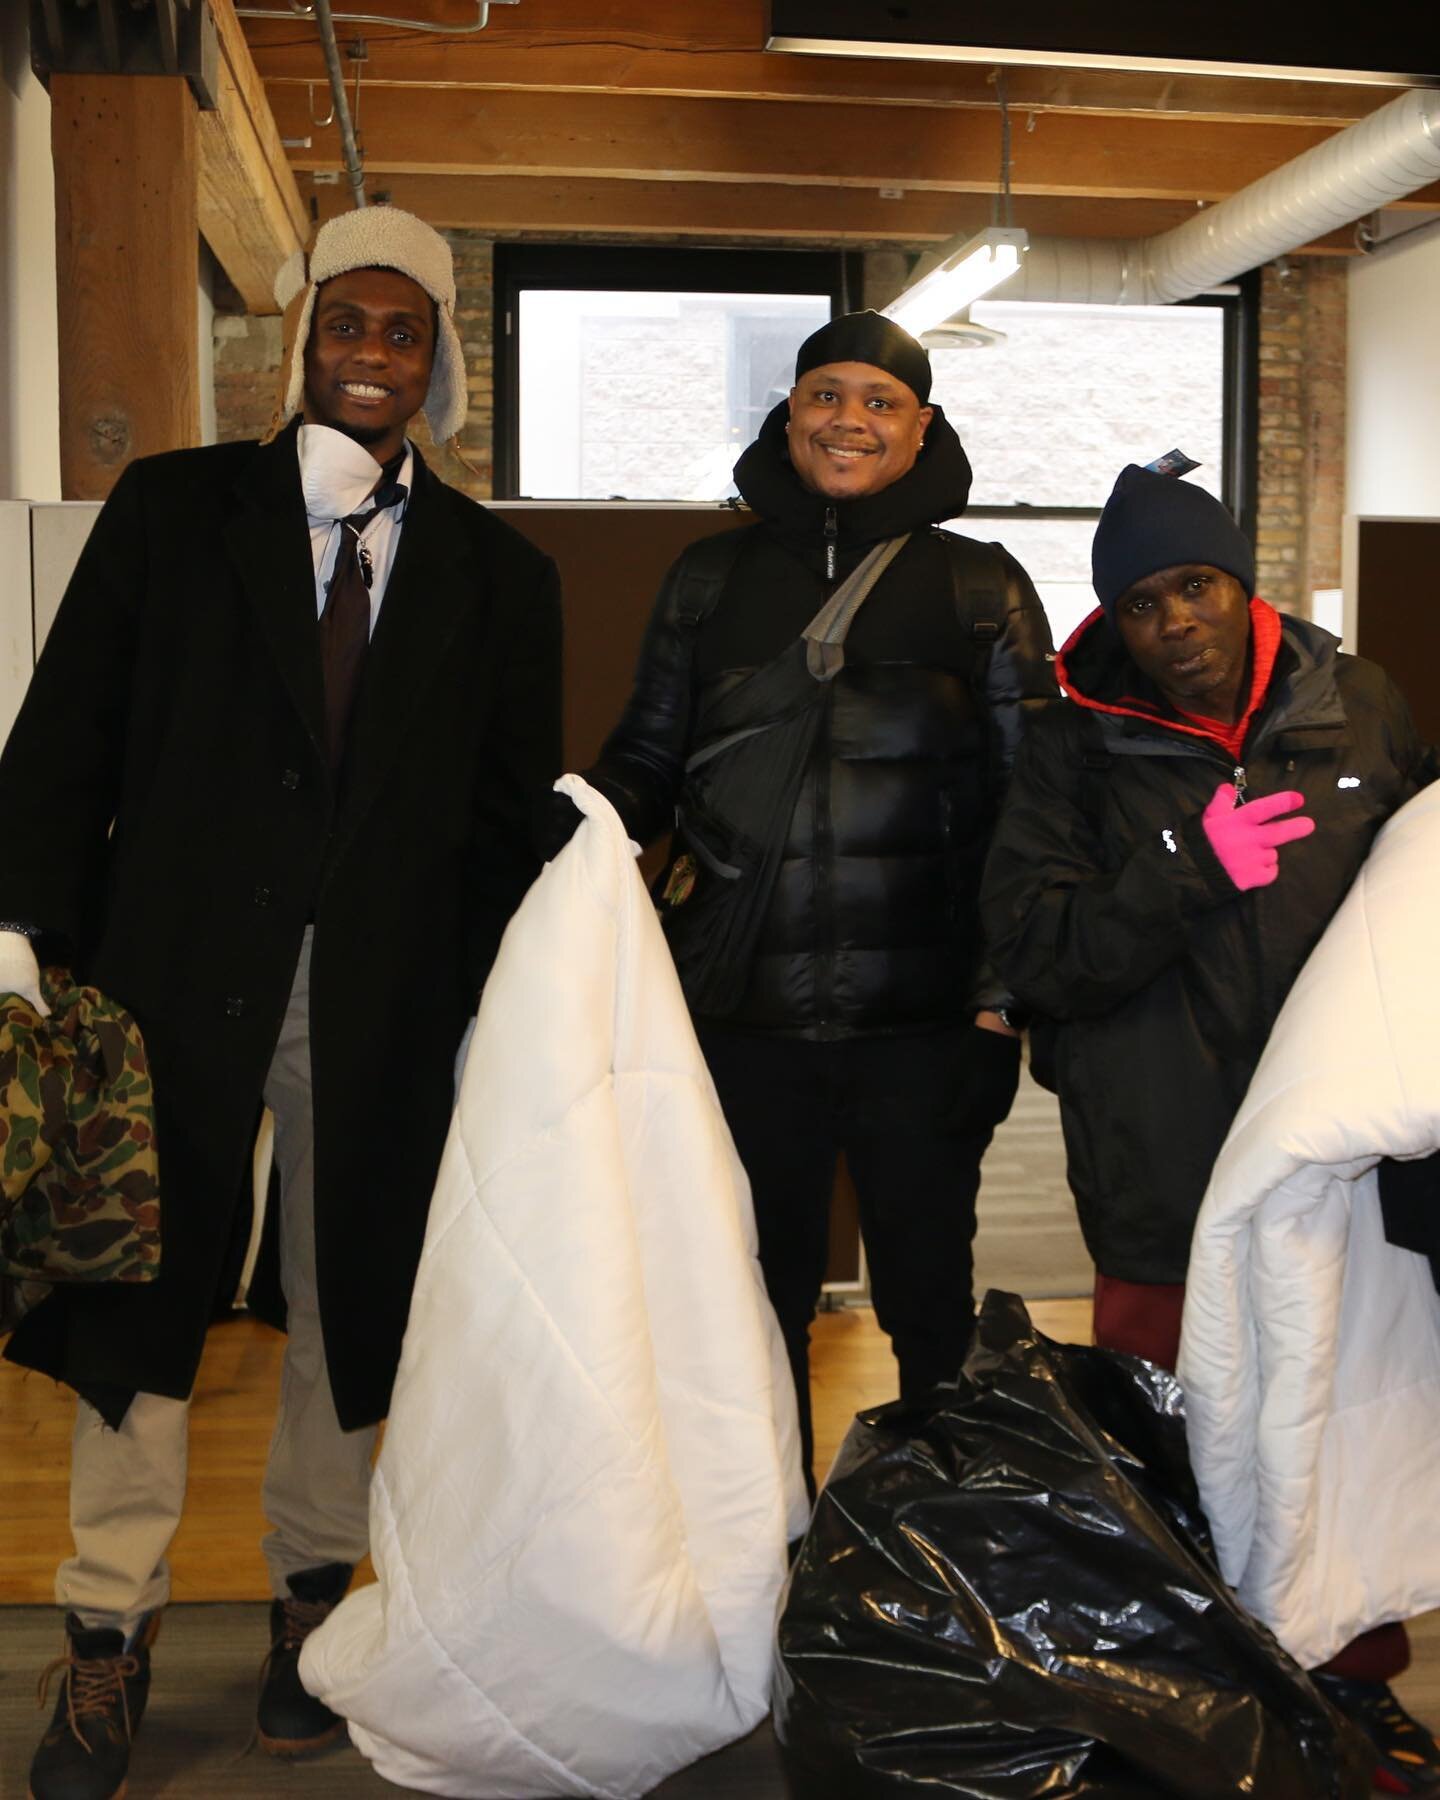 A HUGE thank you to everyone who supported our event Monday! We were able to help so many people get a delicious hot meal (Thank you @terranboyeats) a coat, winter survival supplies and get connected to services through @heartlandalliance @thenightmi